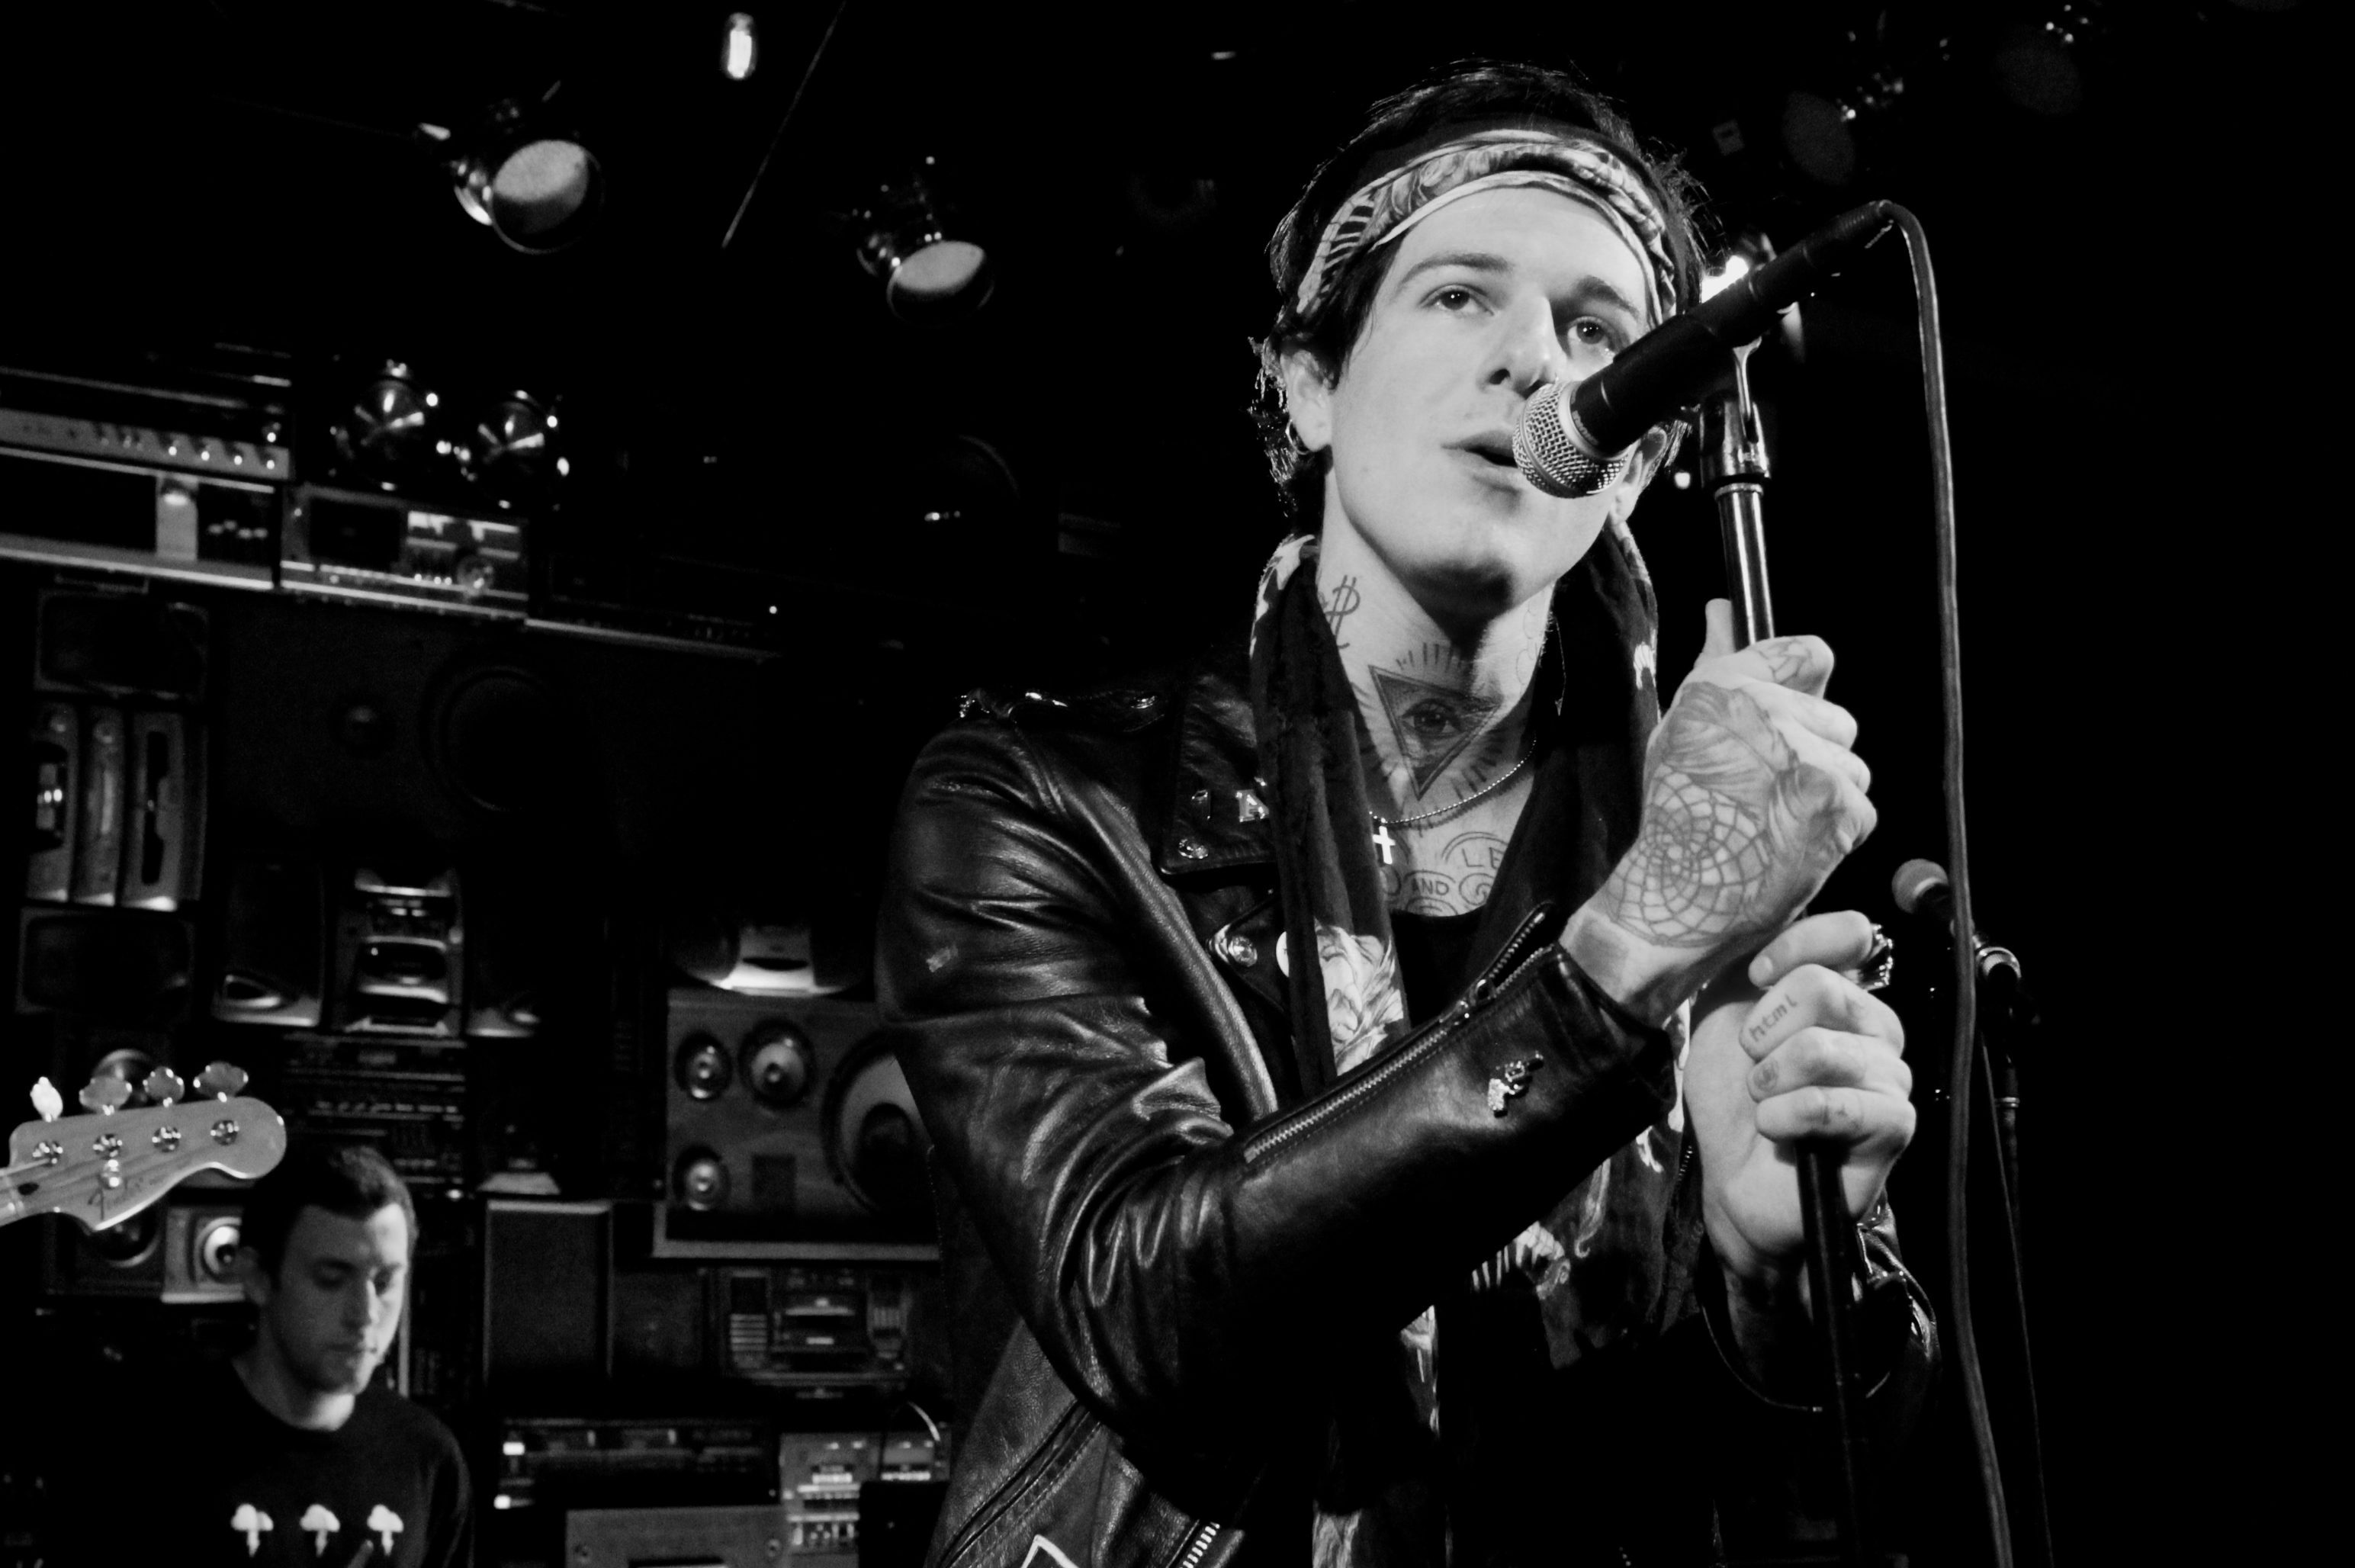 The Neighbourhood Explores the Wild West in New Video for “Devil’s Advocate”